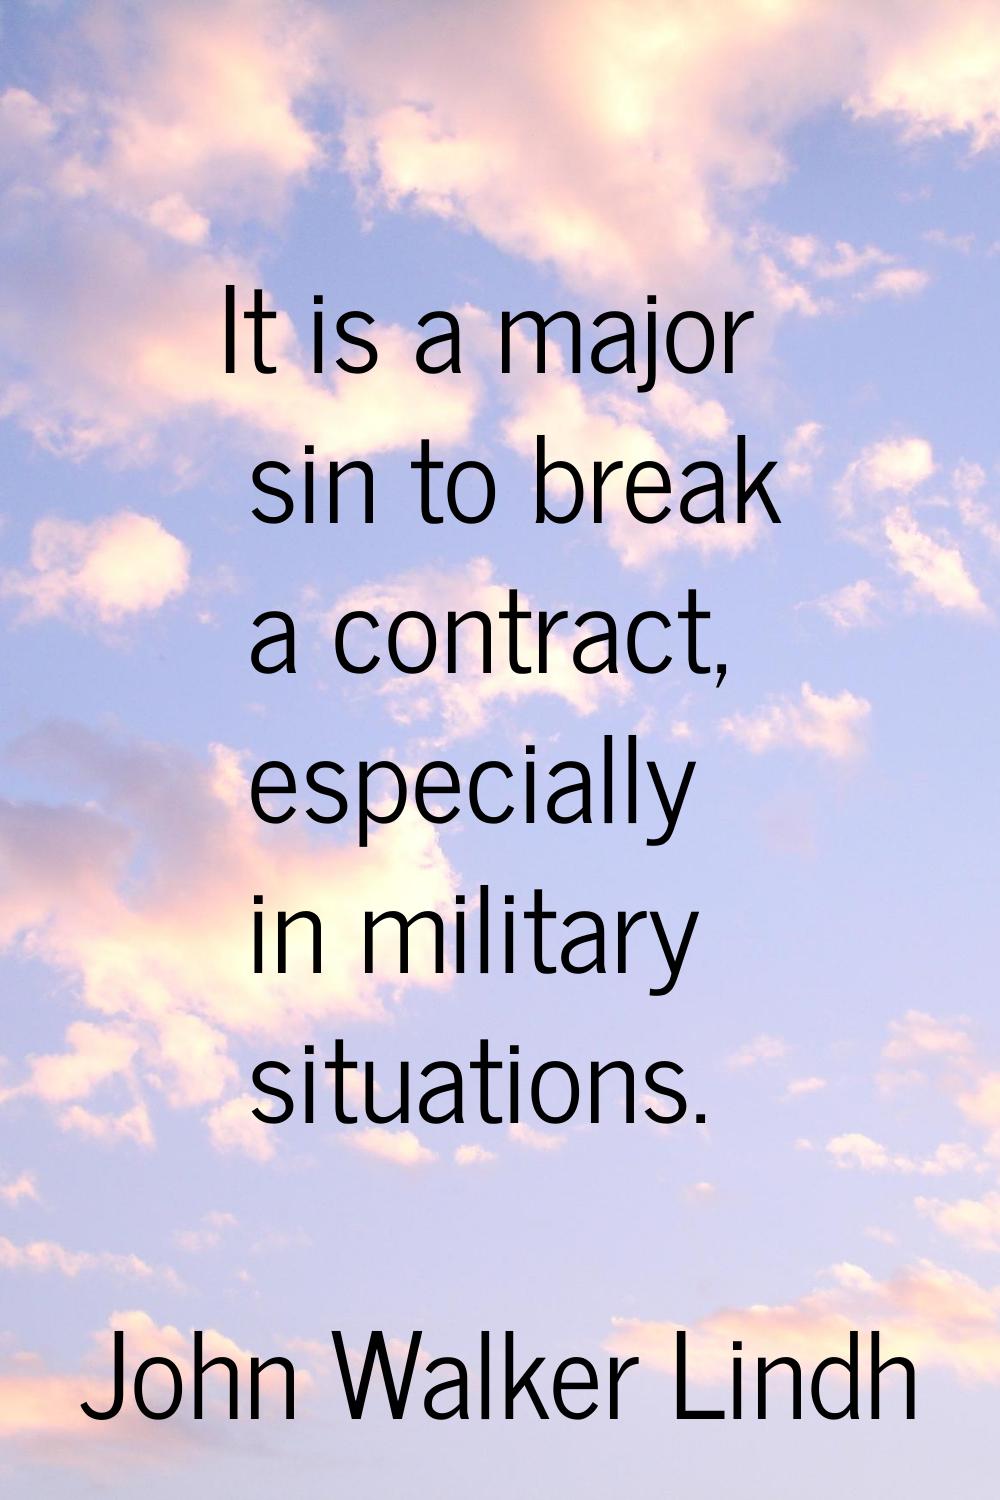 It is a major sin to break a contract, especially in military situations.